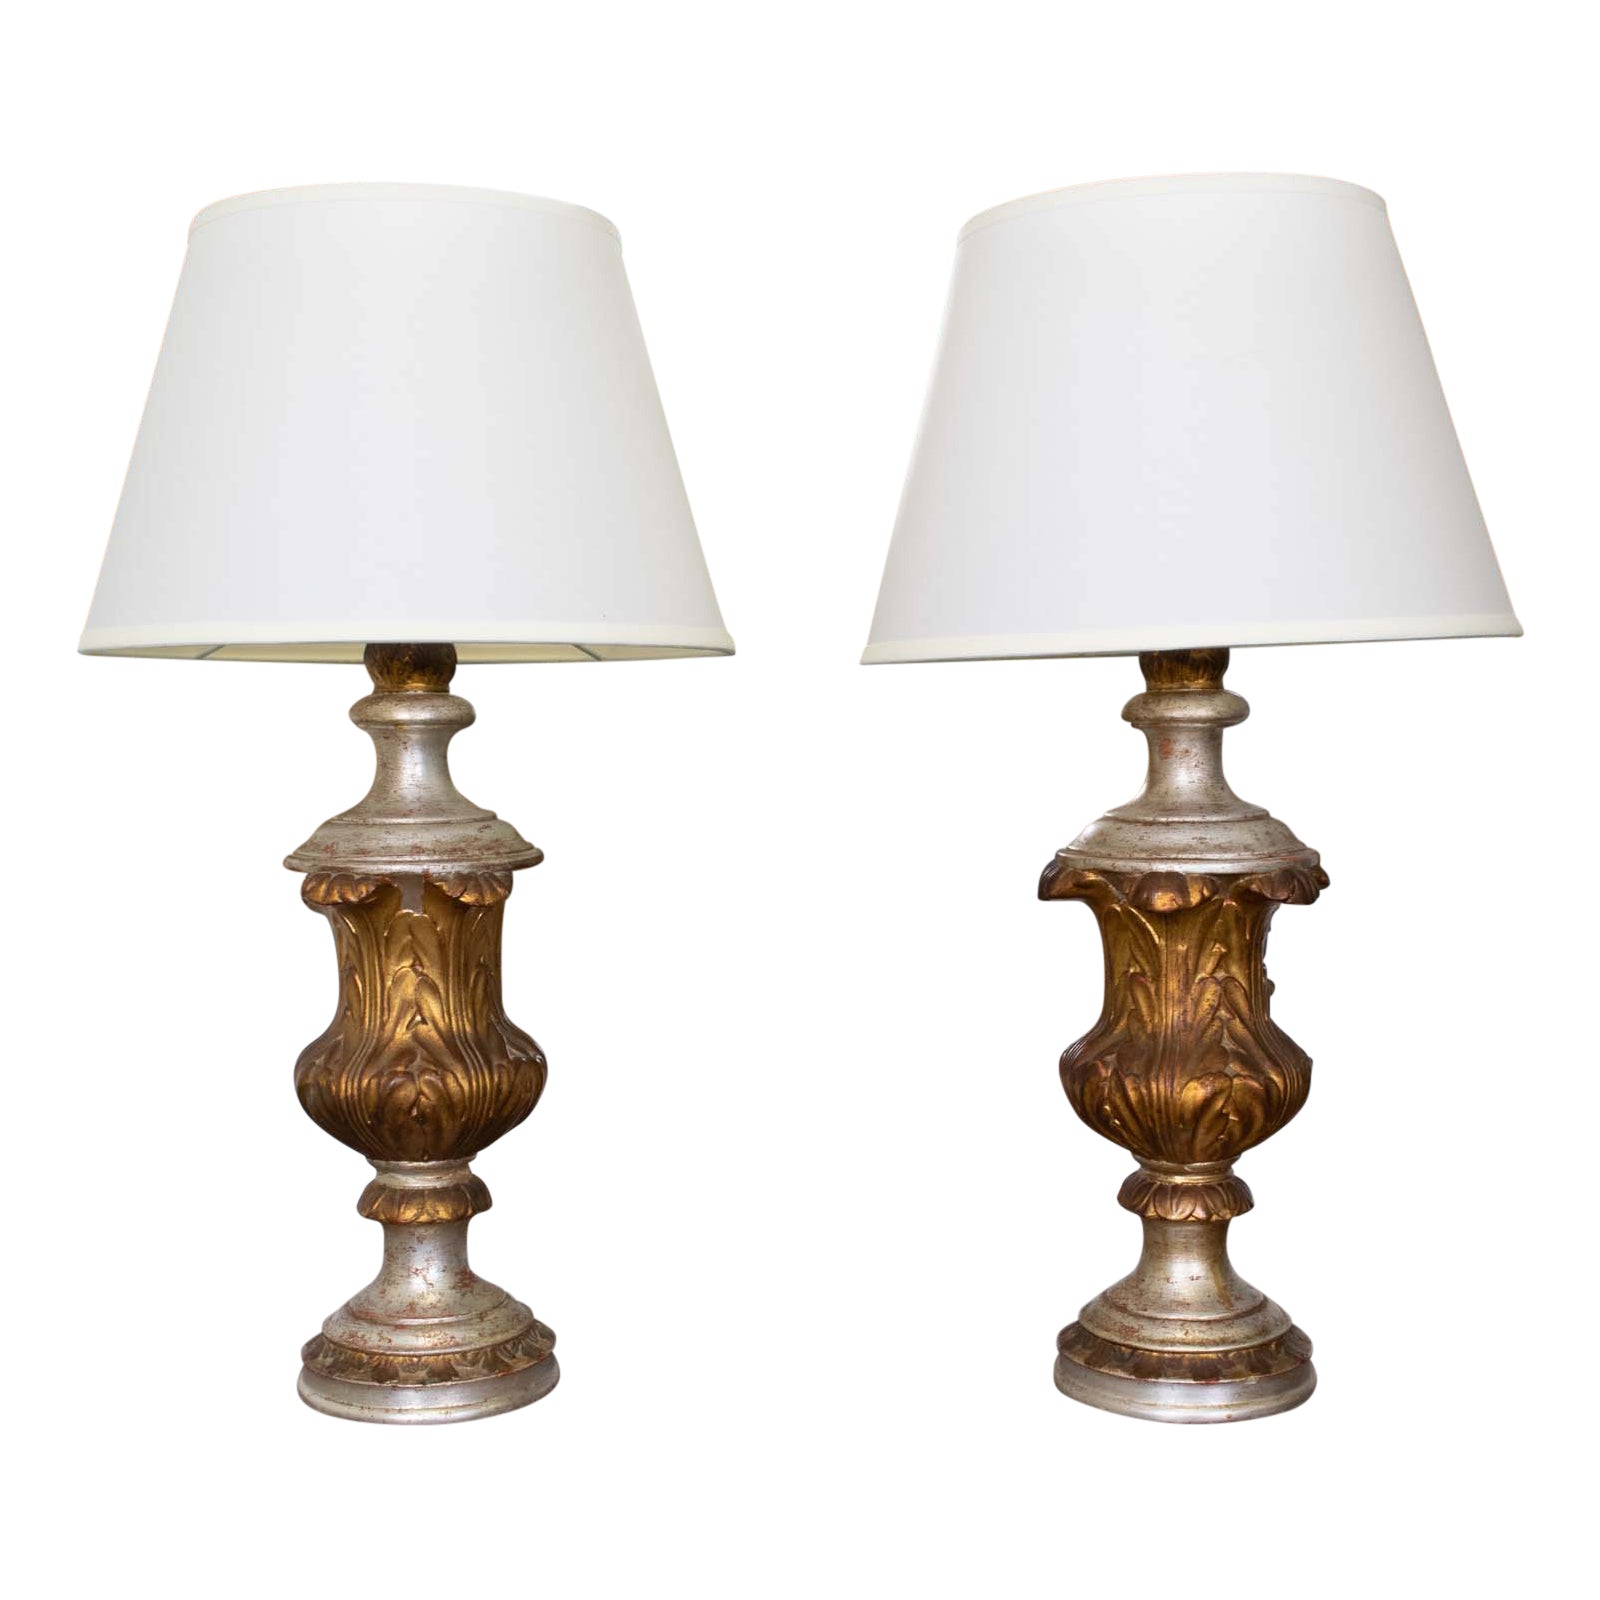 Pair Italian Gilded and Silvered Neo-Classical Urn Lamps